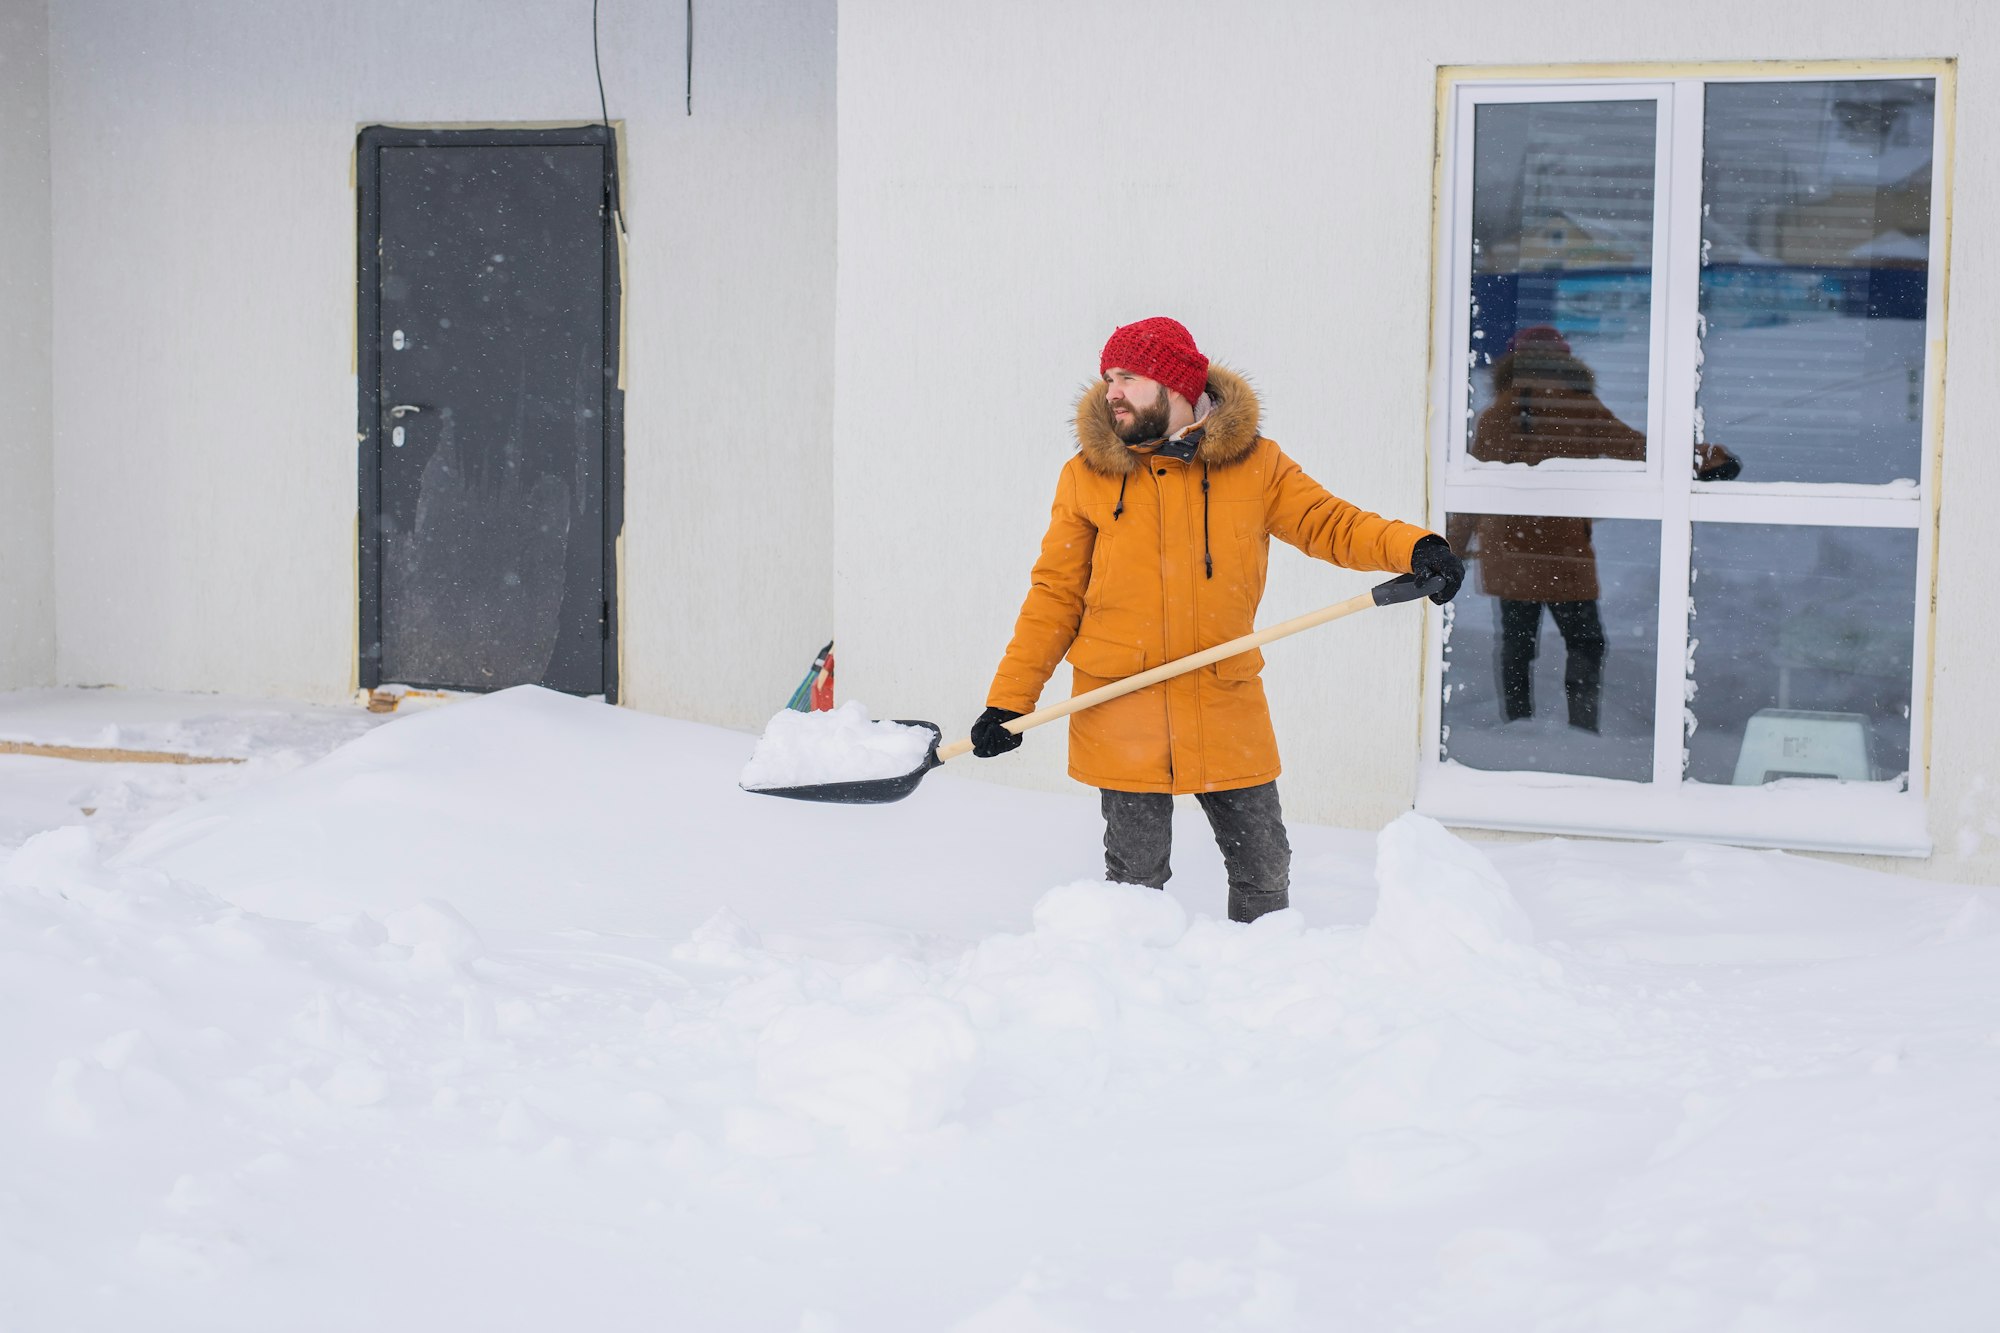 Young man clearing snow in his backyard village house with shovel. Remove snow from the sidewalk.